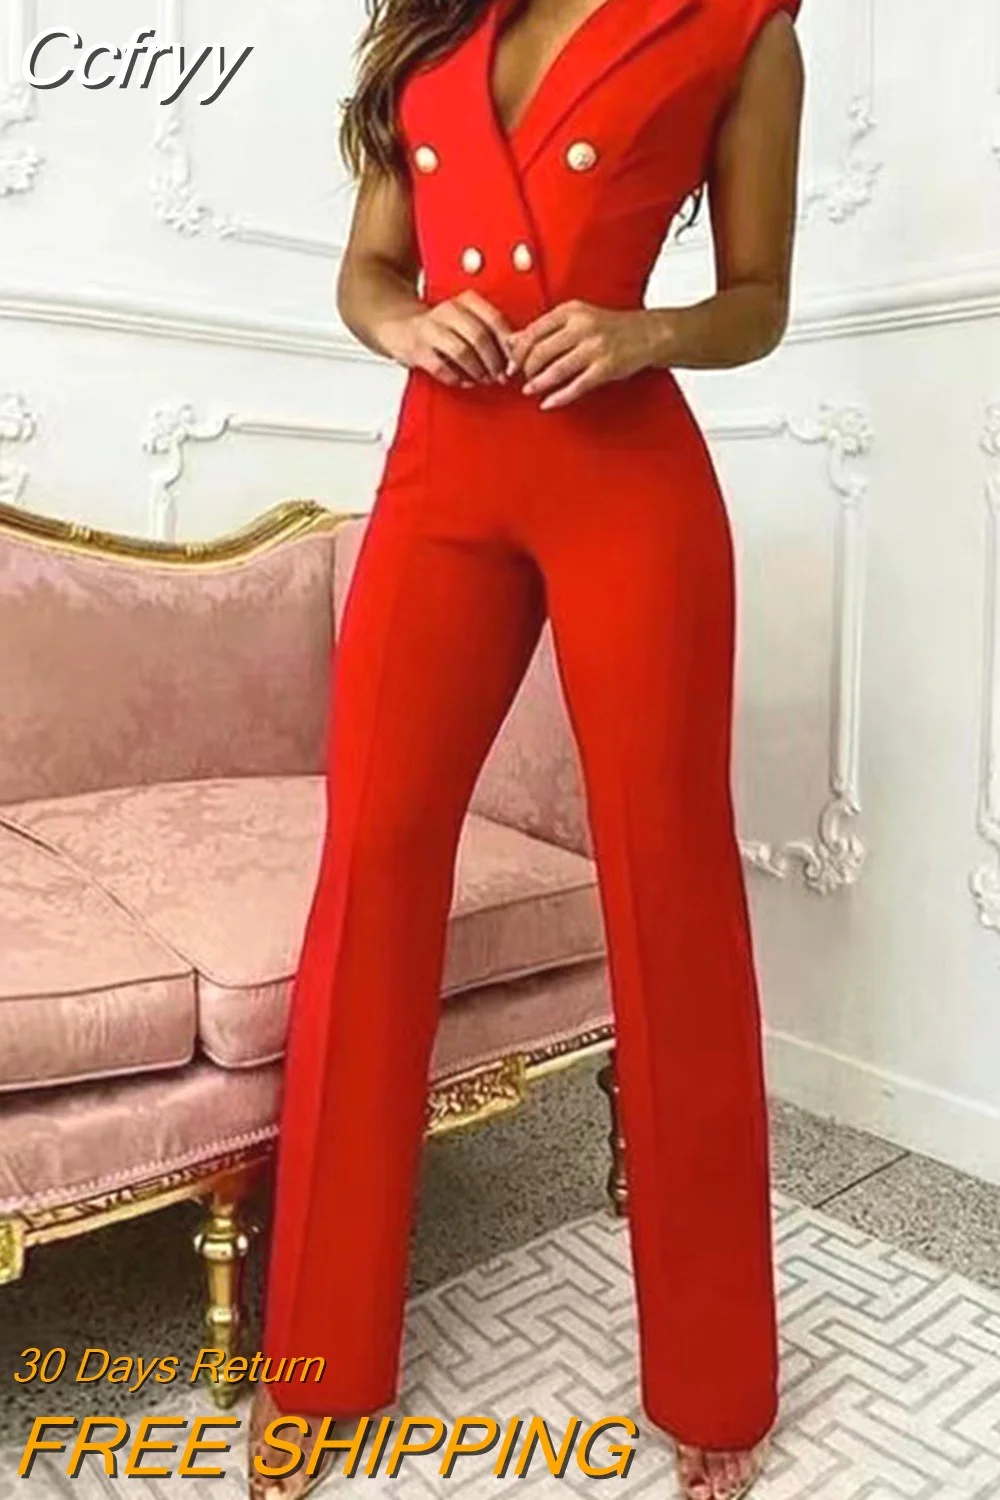 huibahe Summer Red Jumpsuits Women Elegant Office Ladies Button Rompers Fashion Houndstooth Print Casual Wide Leg Pants Playsuits